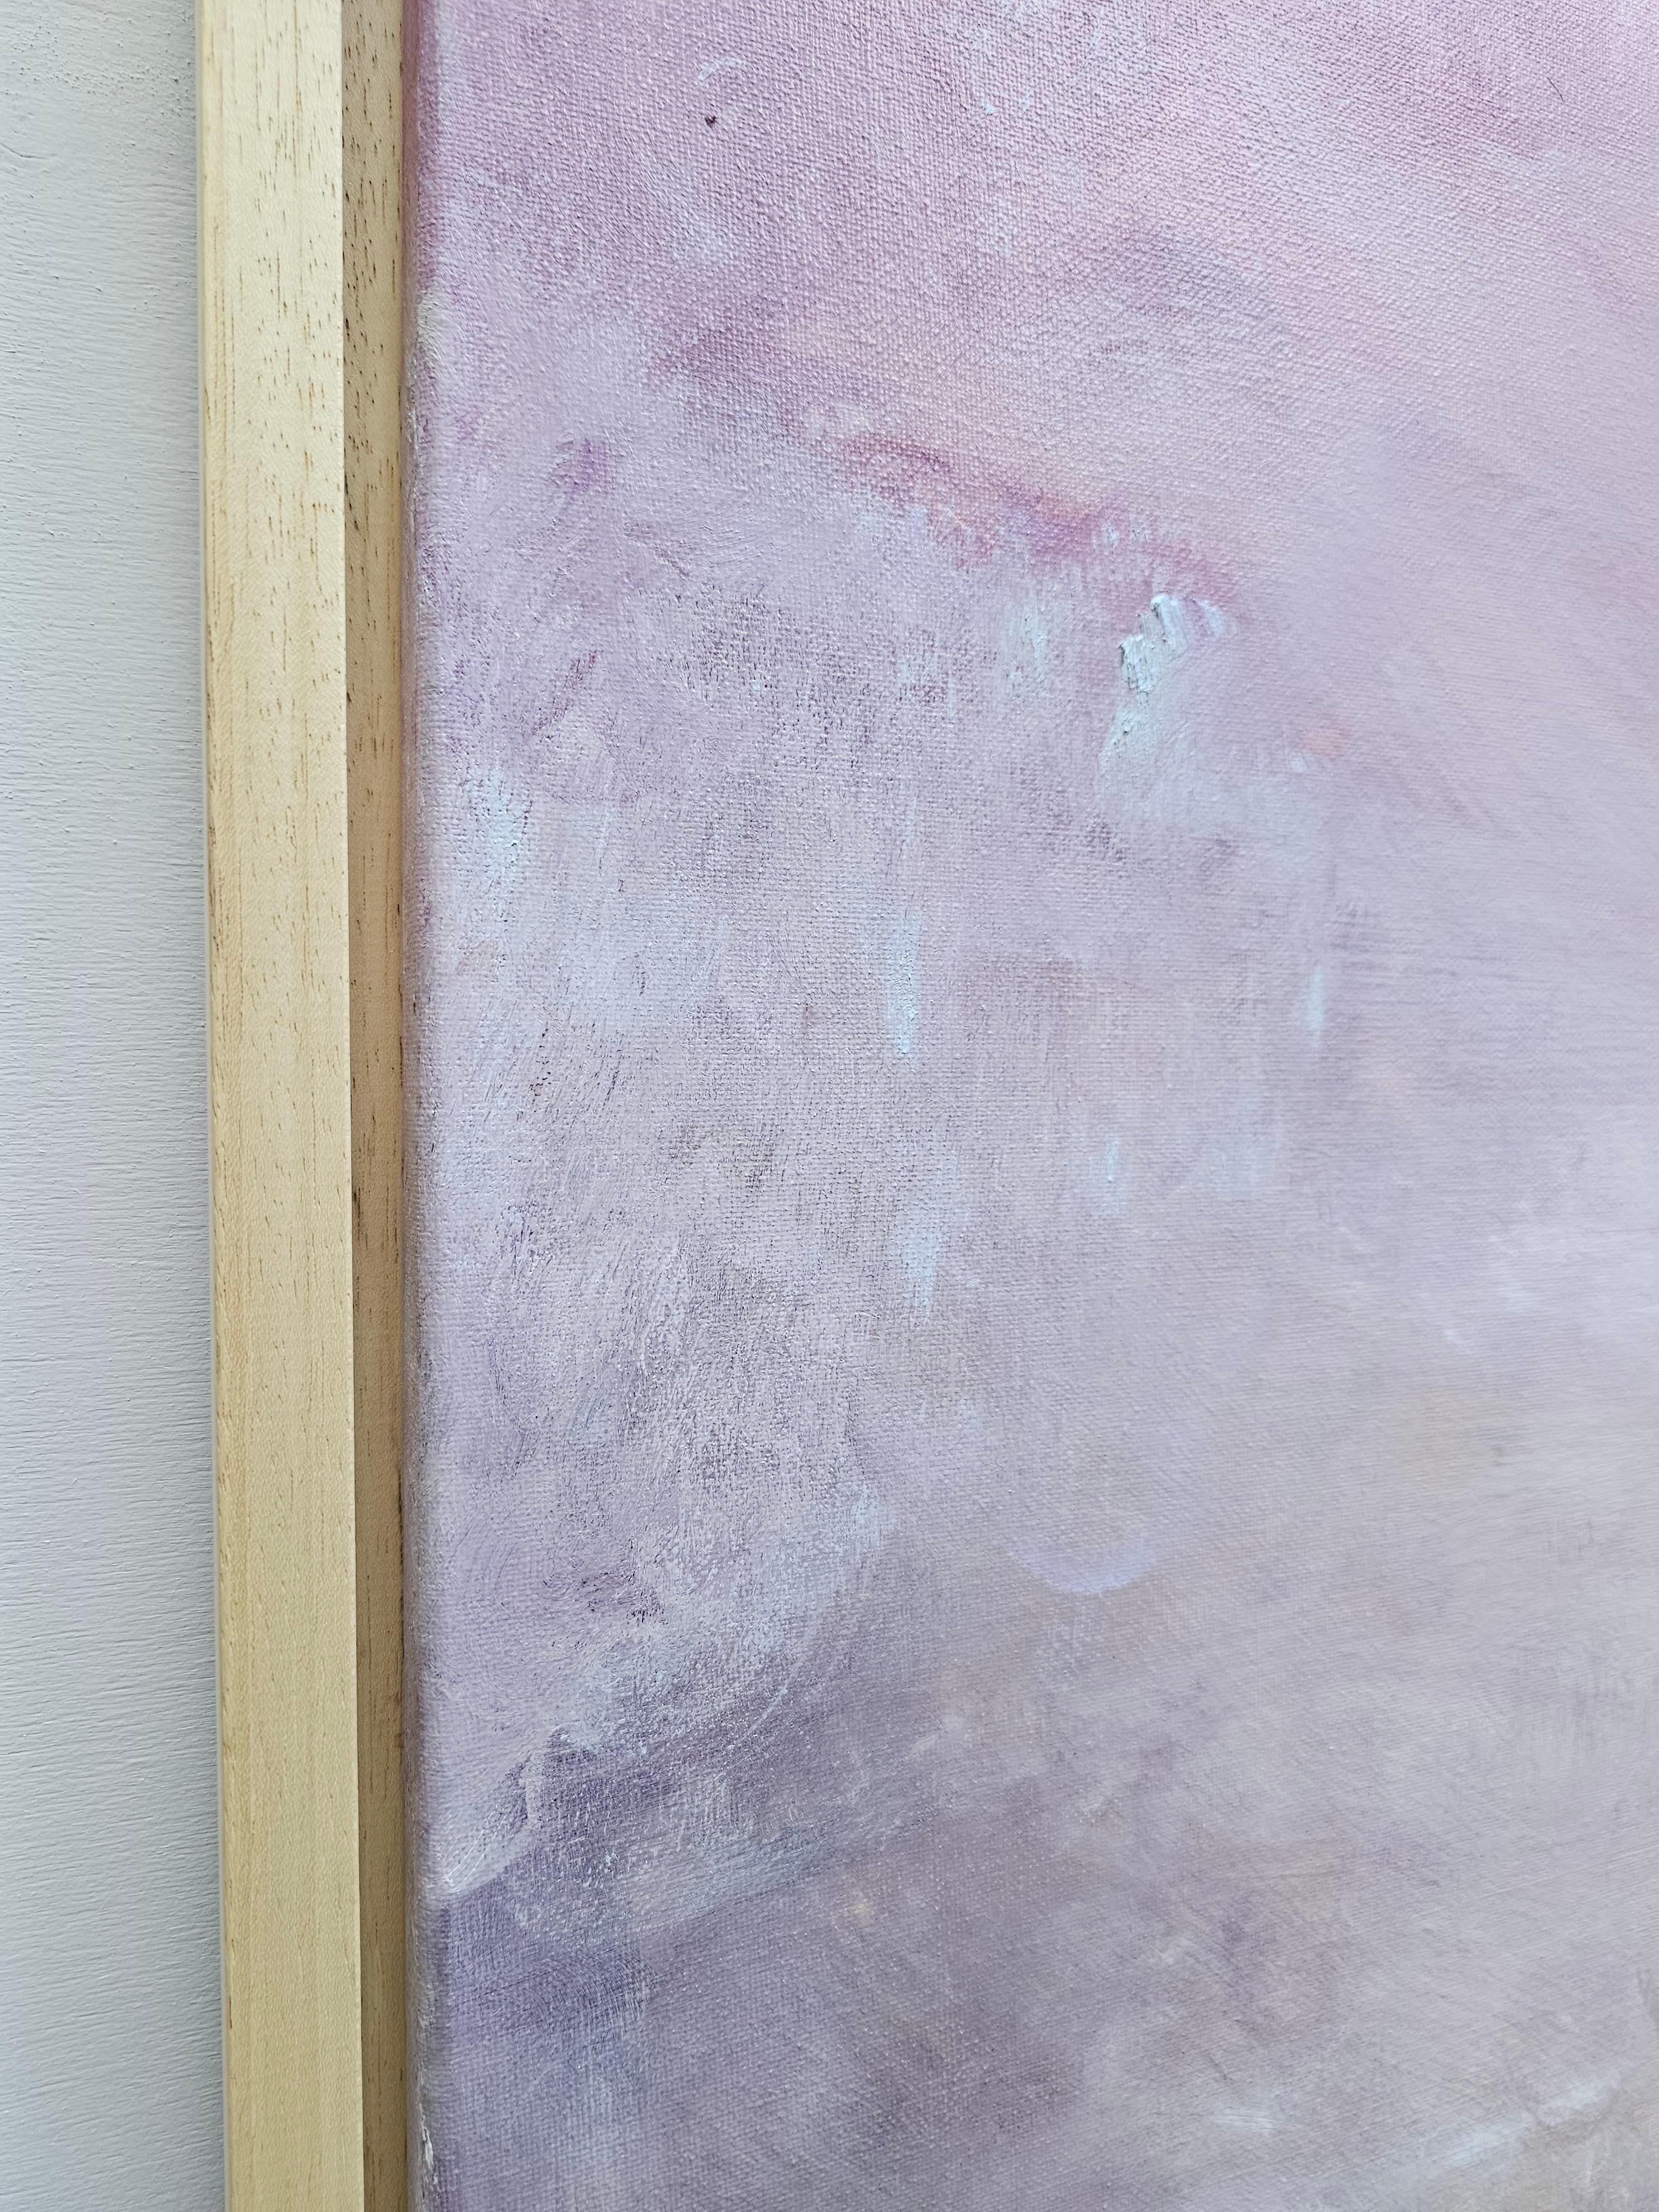 Venus sunrise - soft pink and gold abstract sky painting - Beige Abstract Painting by Jennifer L. Baker